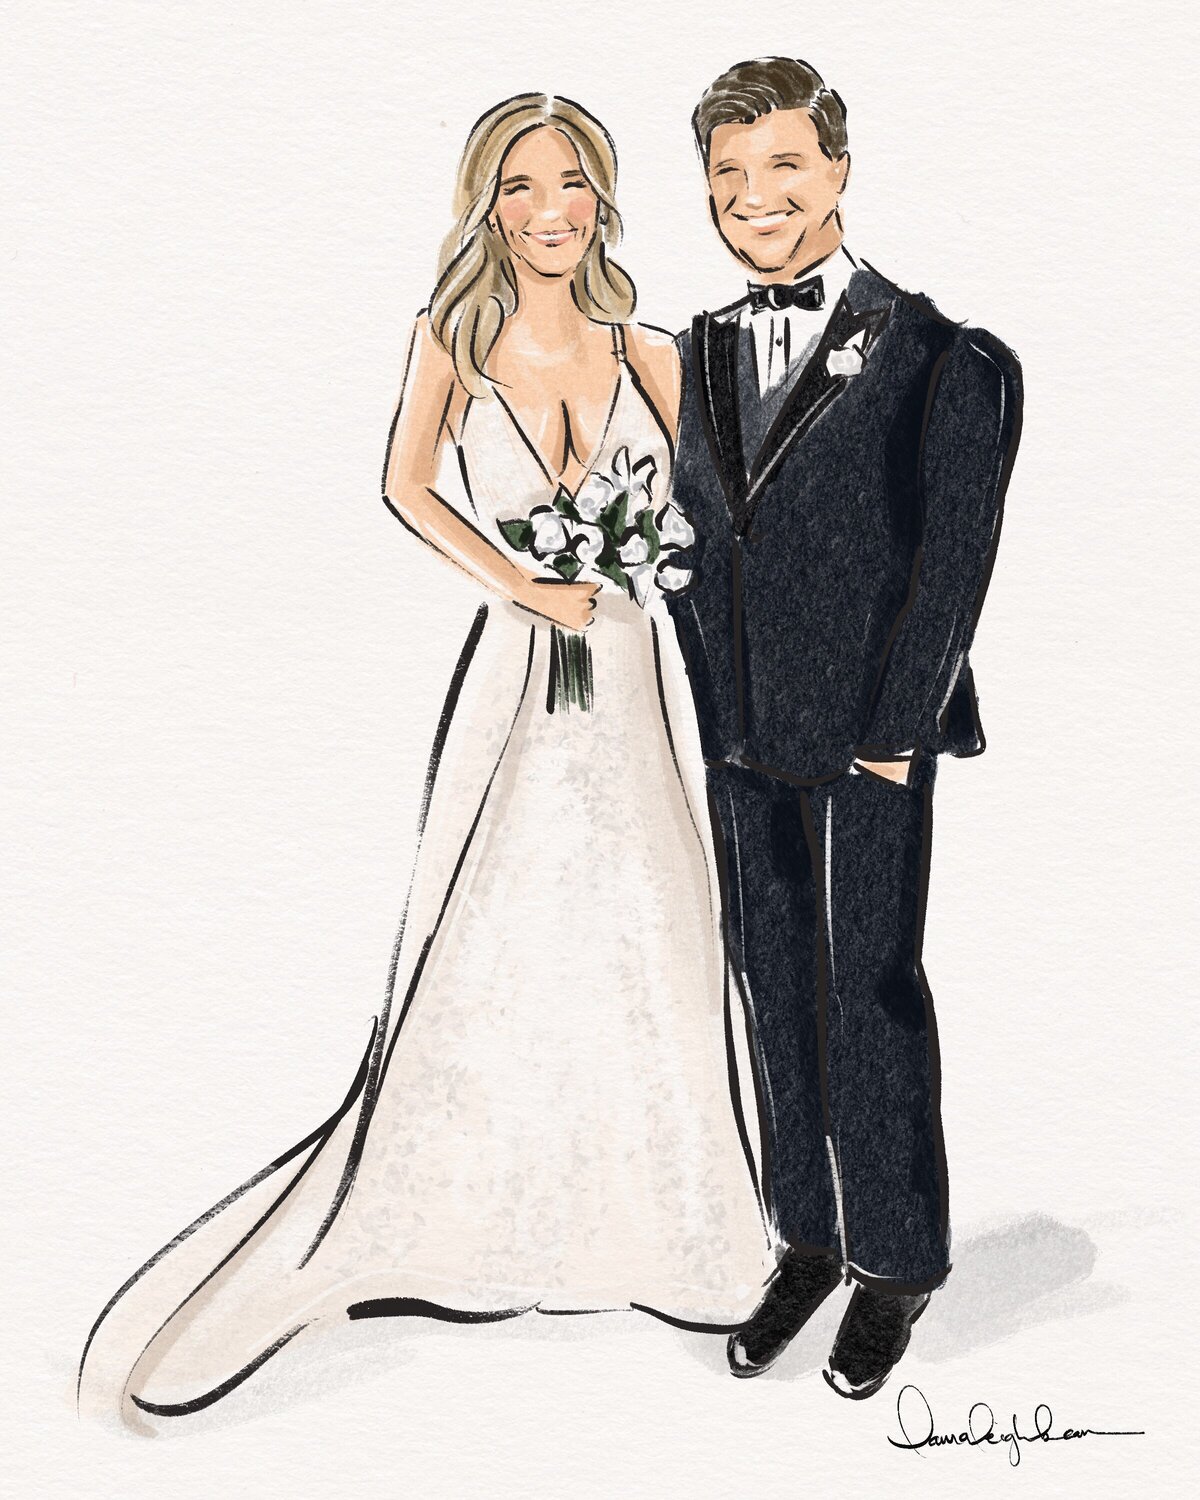 Meghan and Chris - Clover Events LLB Illo